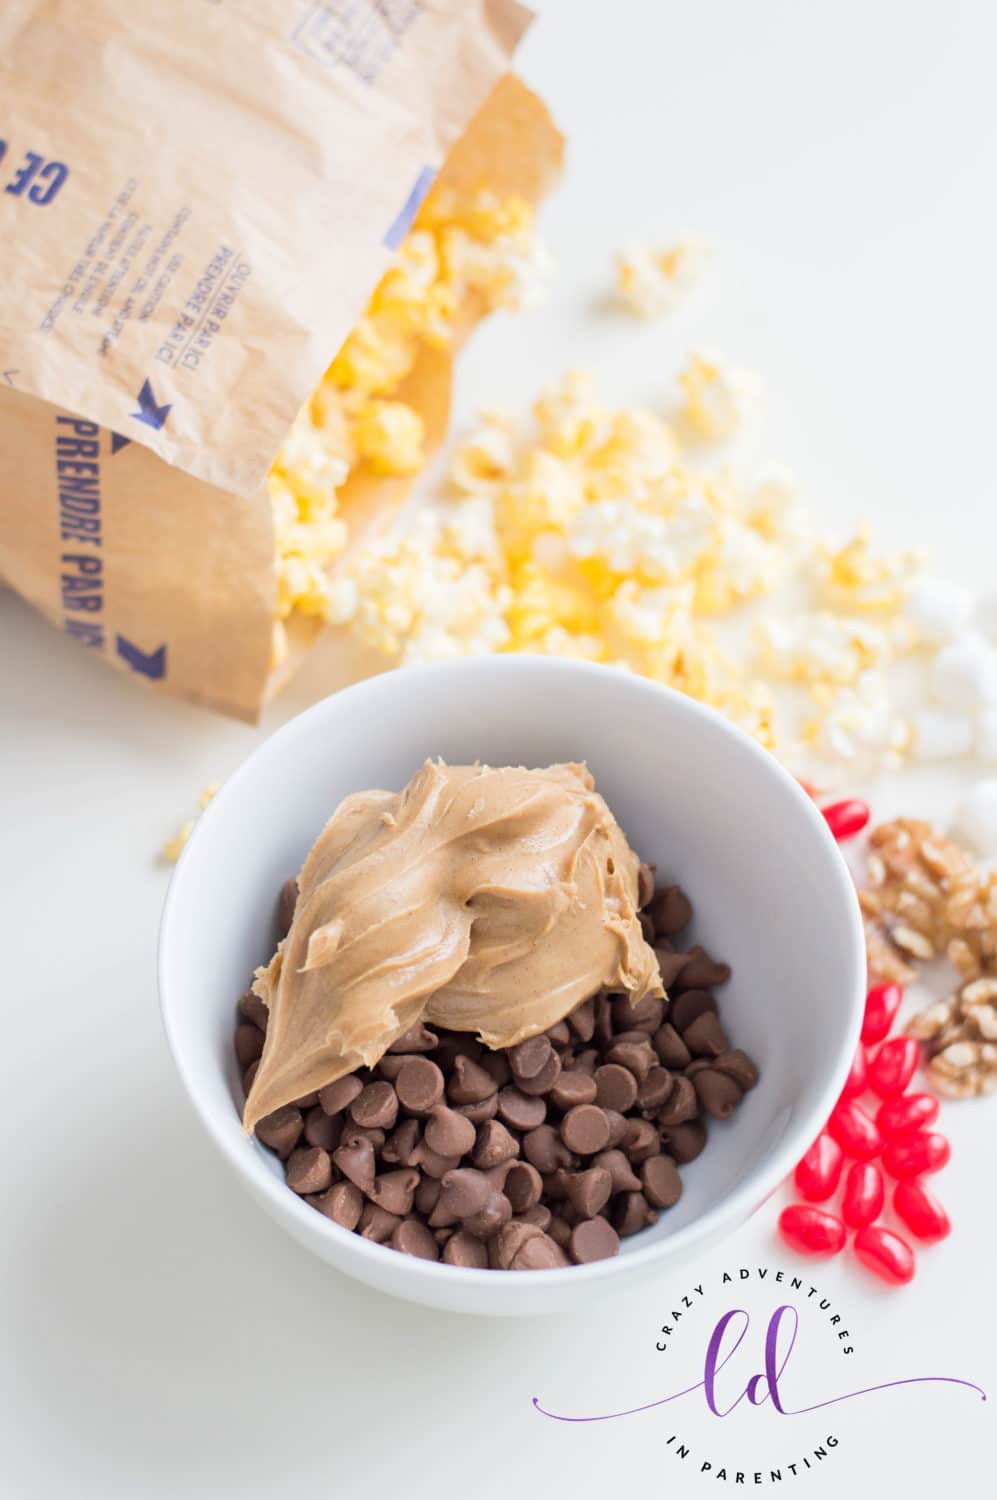 Put peanut butter and chocolate chips into bowl for Christmas Popcorn